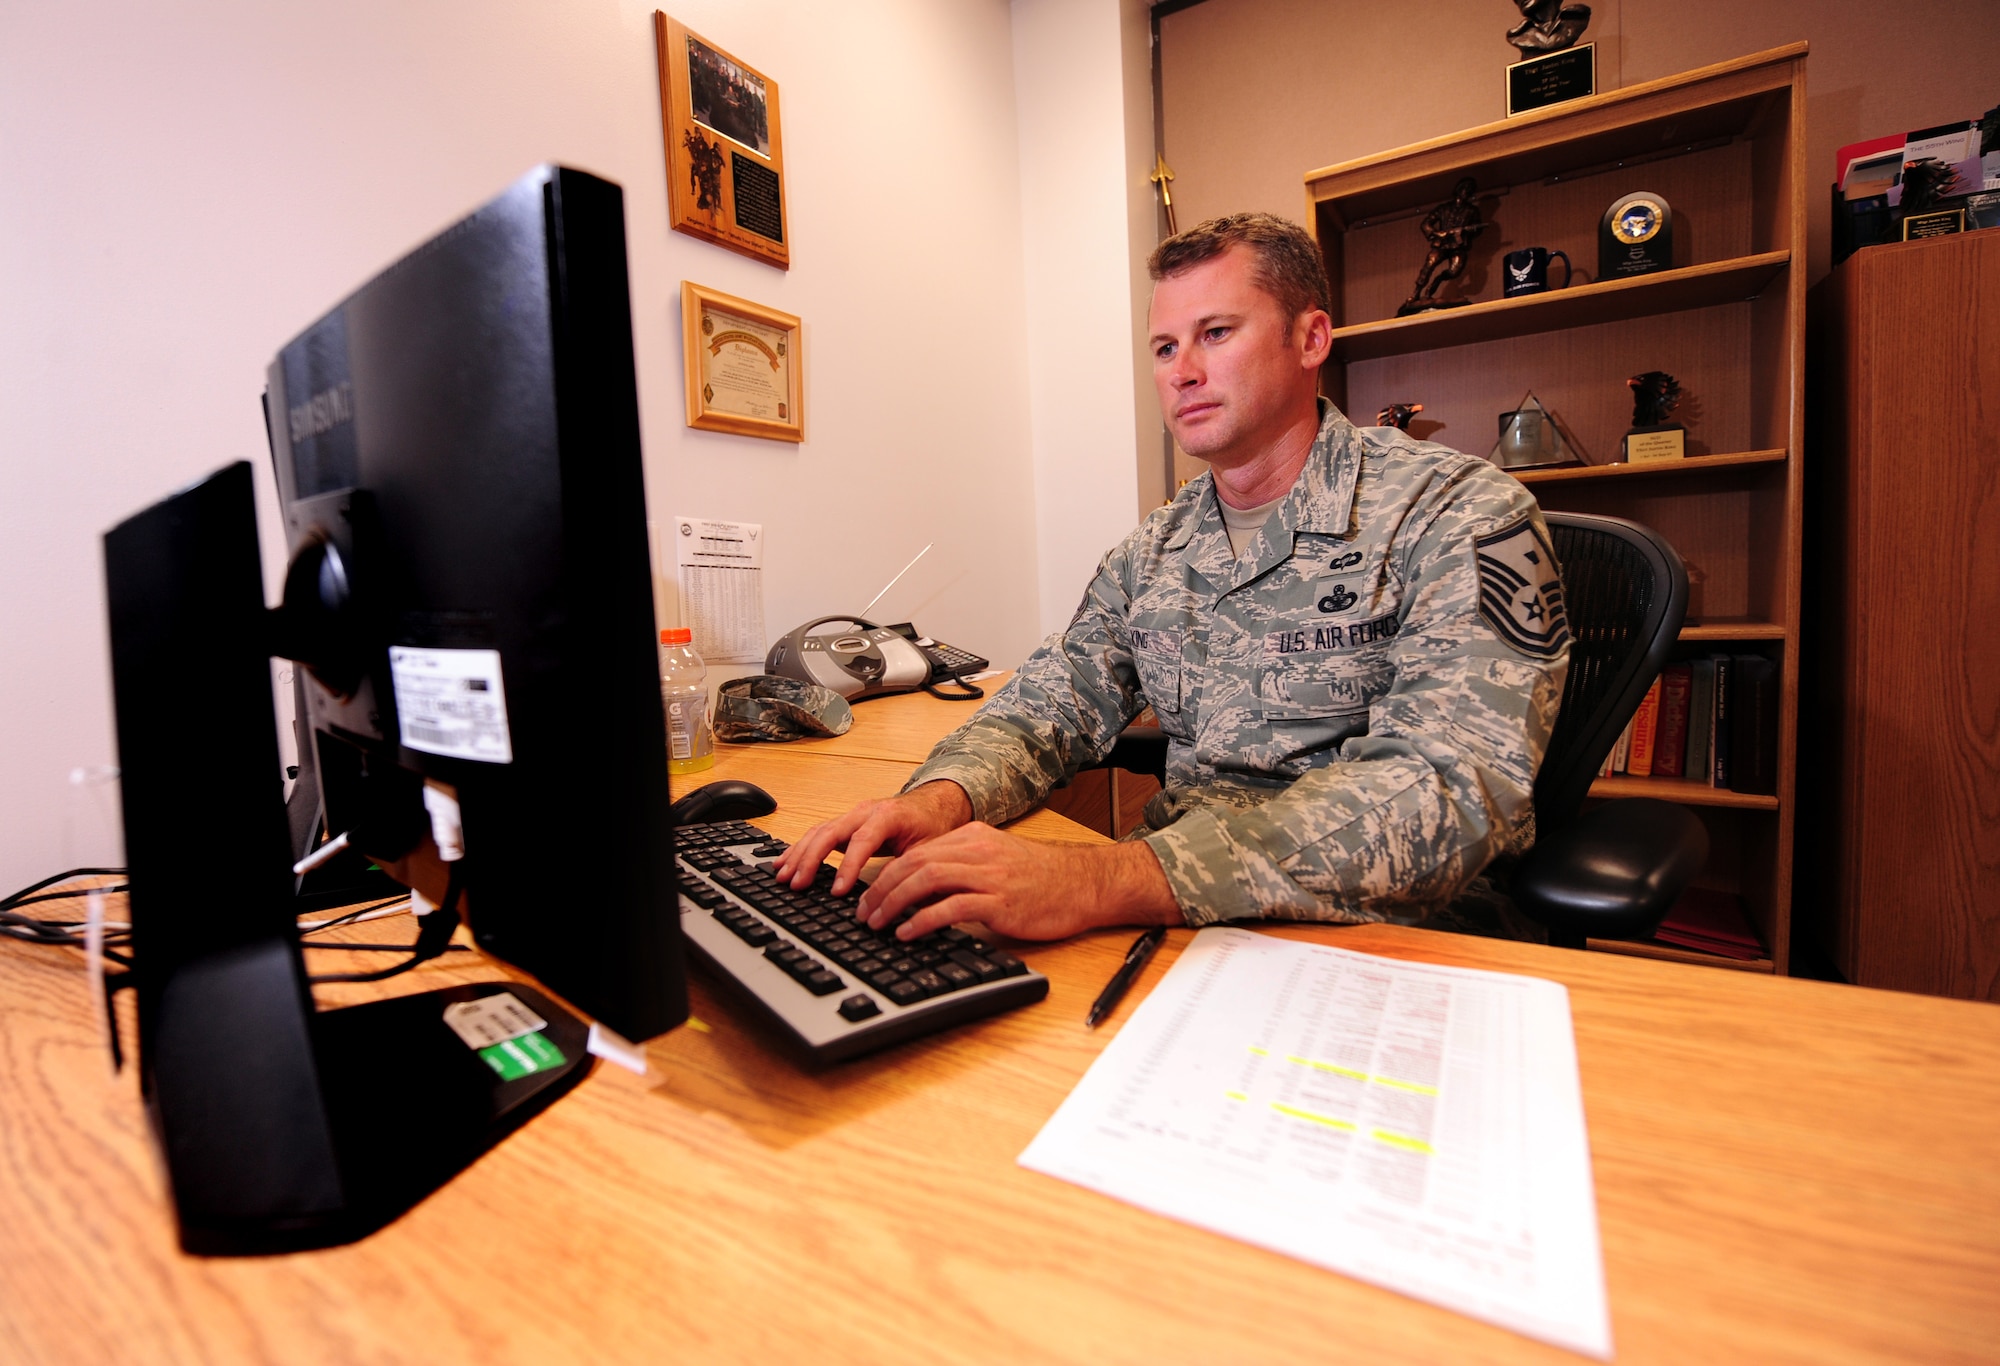 OFFUTT AIR FORCE BASE, Neb. - Master Sgt. Justin King, first sergeant for the 55th Wing staff, checks emails along with numerous other tasks in his office, located in building C, Aug. 25.  Sergeant King handles many administrative duties and administers corrective actions when necessary to members under the commander's authority. U.S. Air Force photo by Josh Plueger
